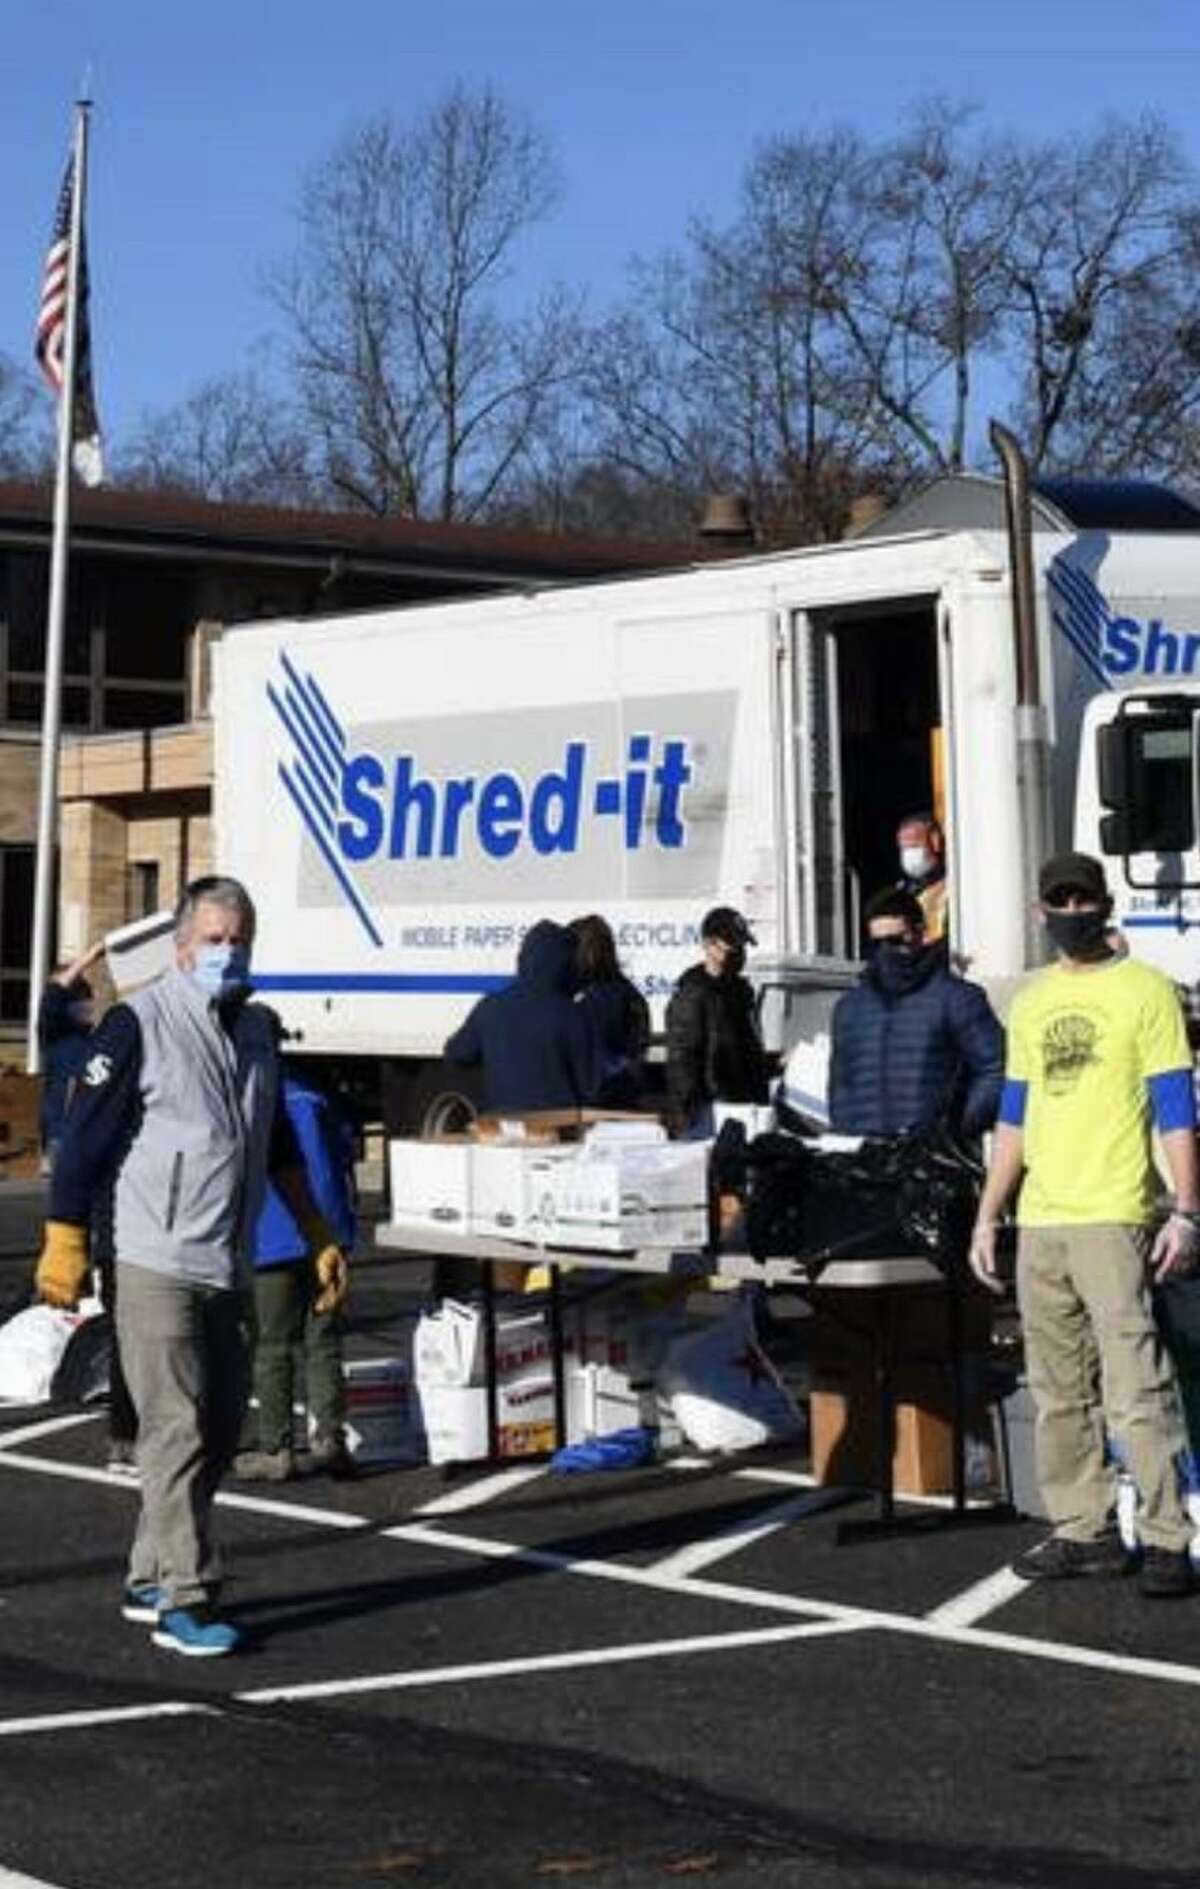 The Rotary Club of Derby-Shelton is sponsoring a shredding event on April 23, 2022, at the parking lot of St. Lawrence Church, 505 Shelton Ave., Shelton.